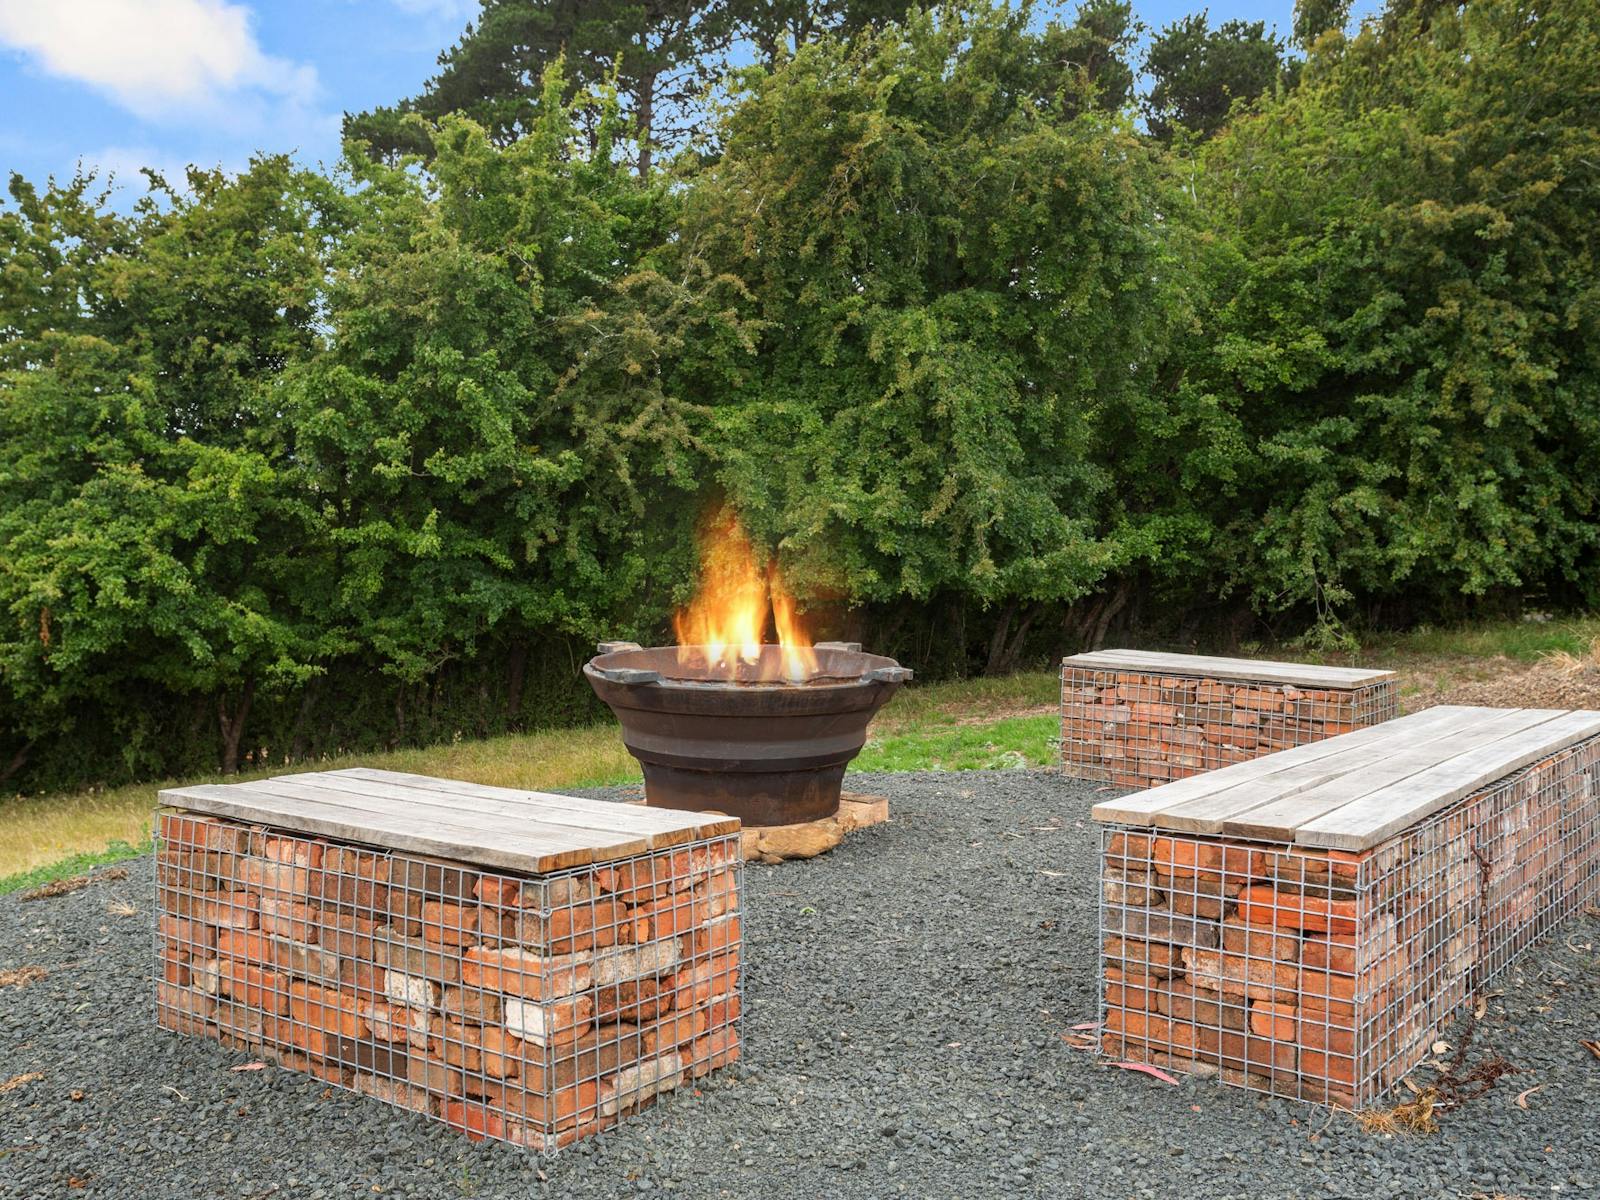 Fire coming out of rustic iron firpit with stone brick seating around it